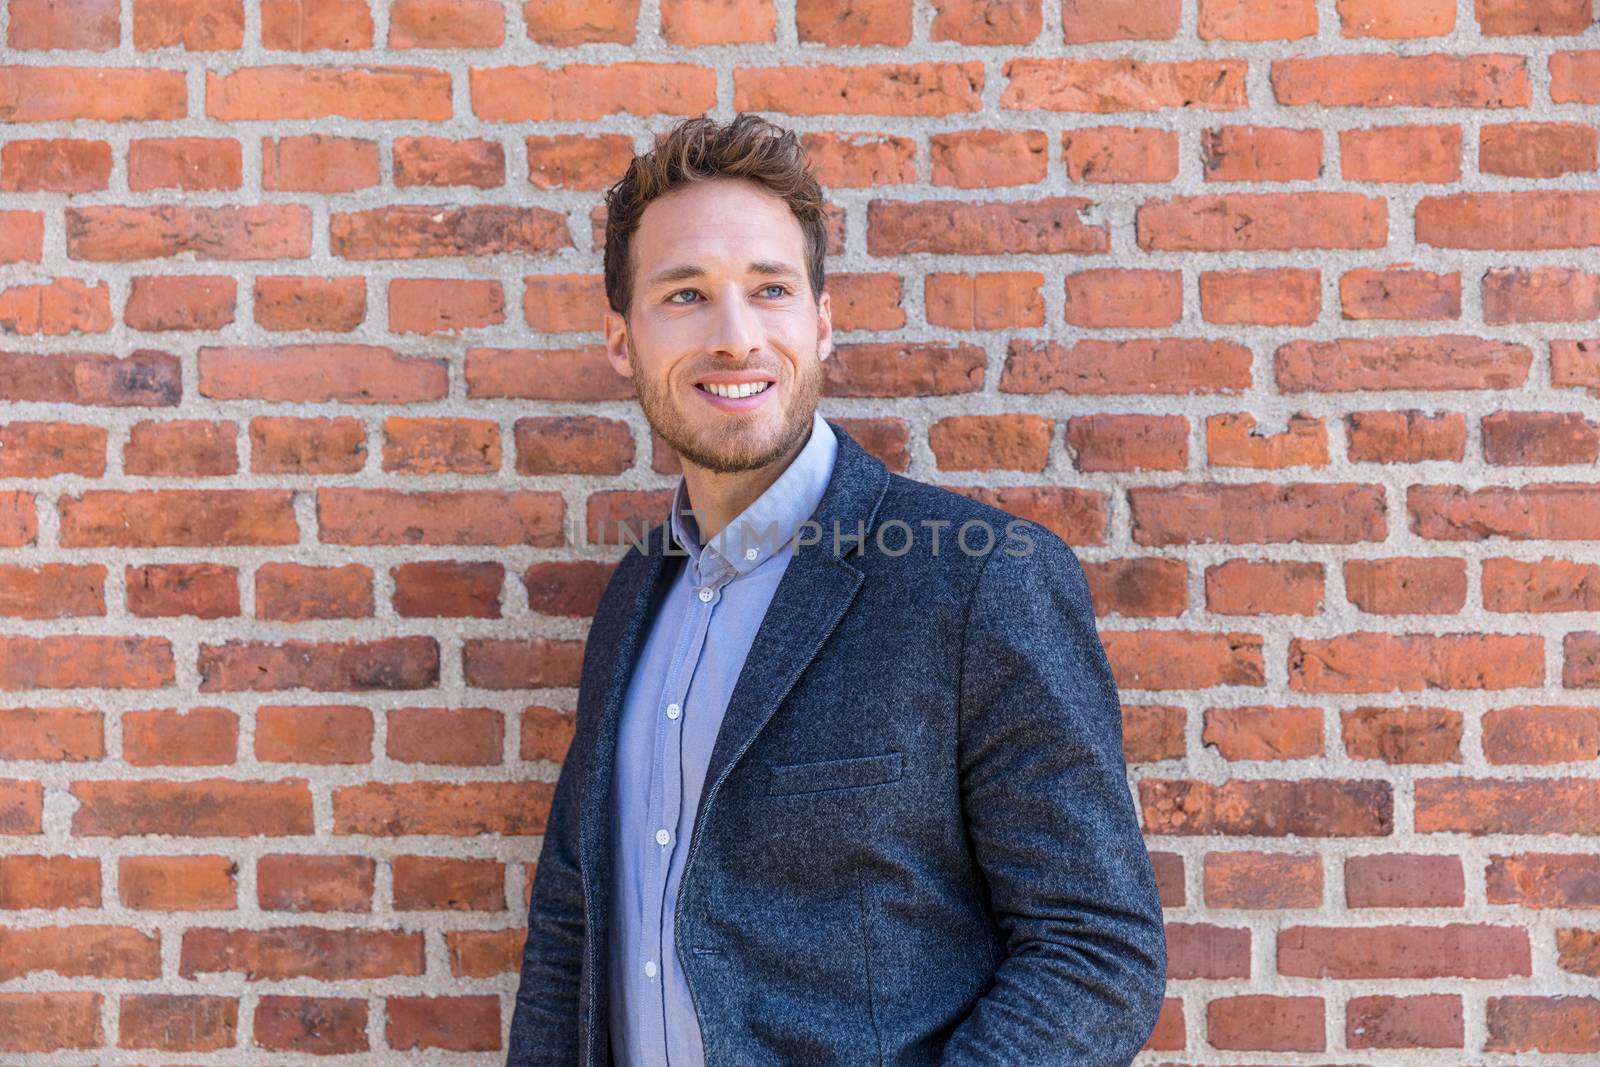 Man professional businessman portrait. Smart casual urban business man smiling happy at office building or city street. Handsome man wearing suit jacket indoors.